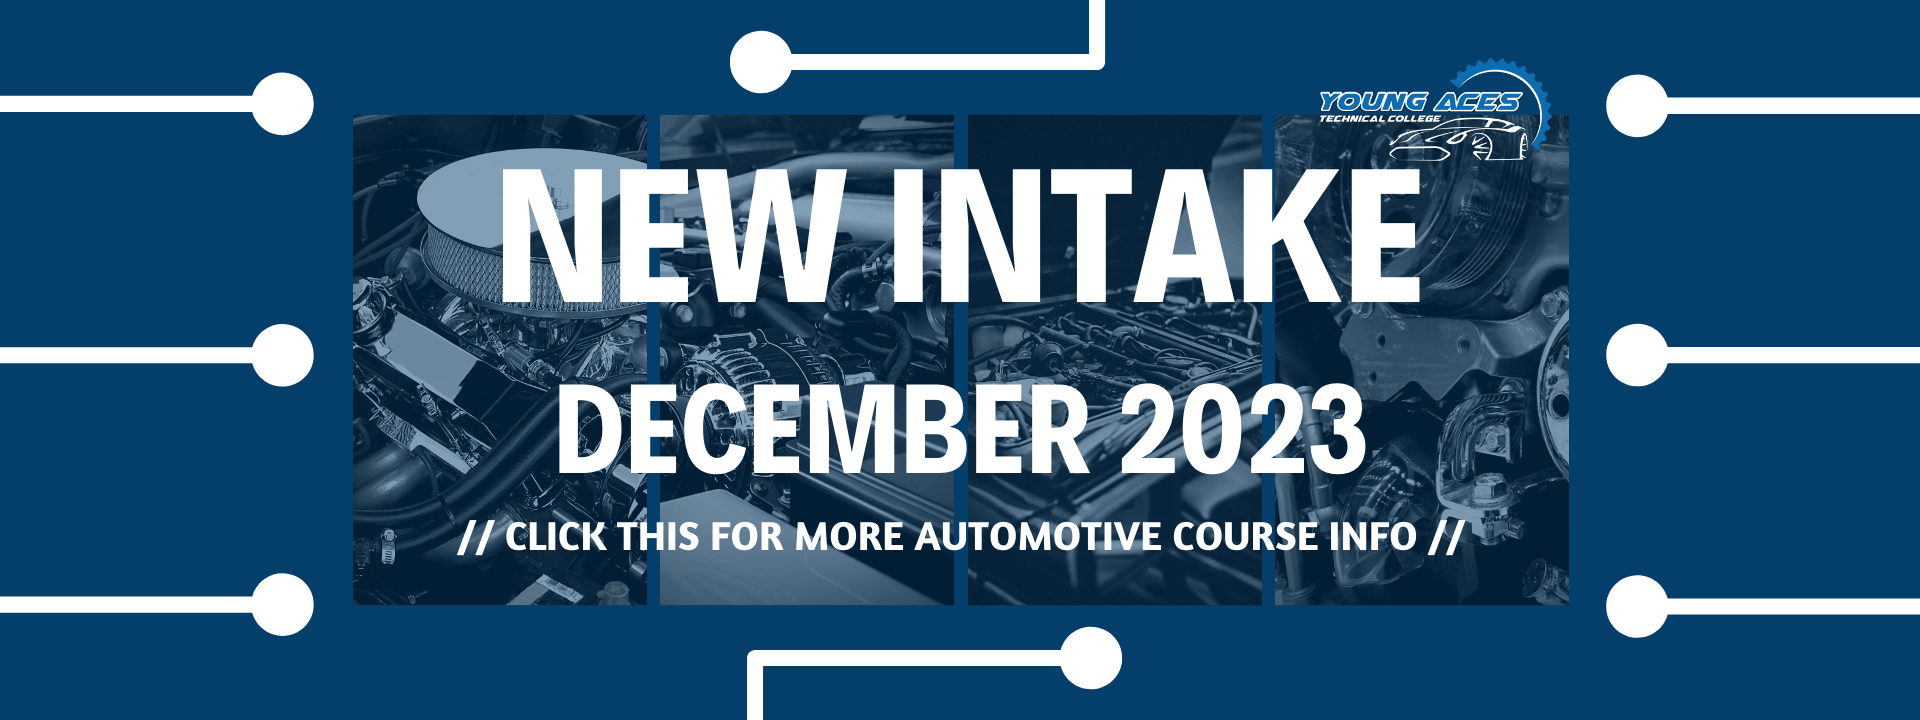 Automotive Engineering Course New Intake